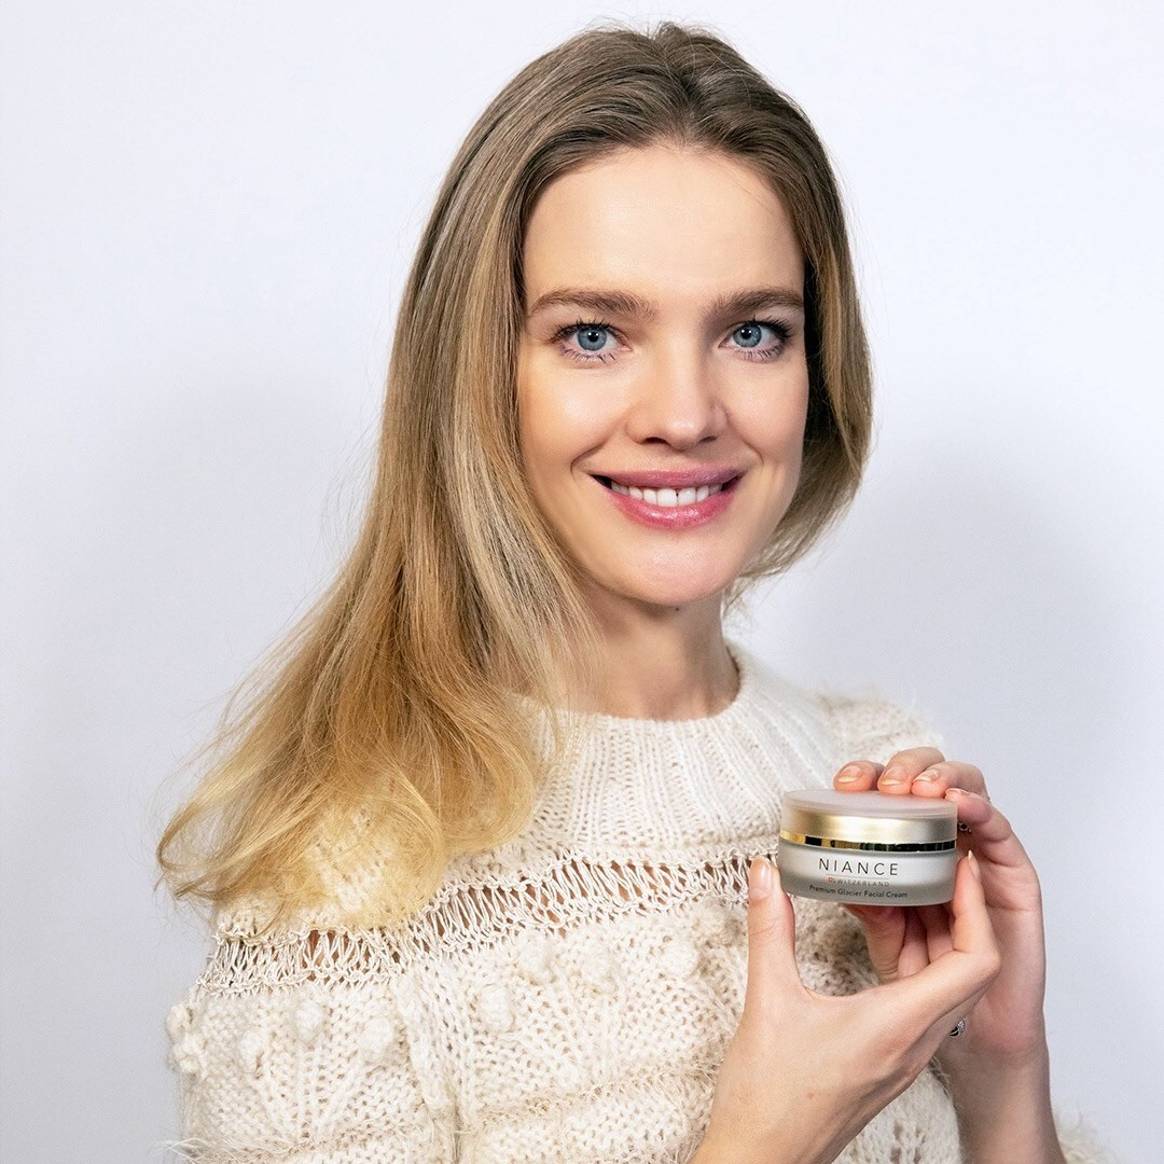 Natalia Vodianova invests in Swiss beauty brand Niance